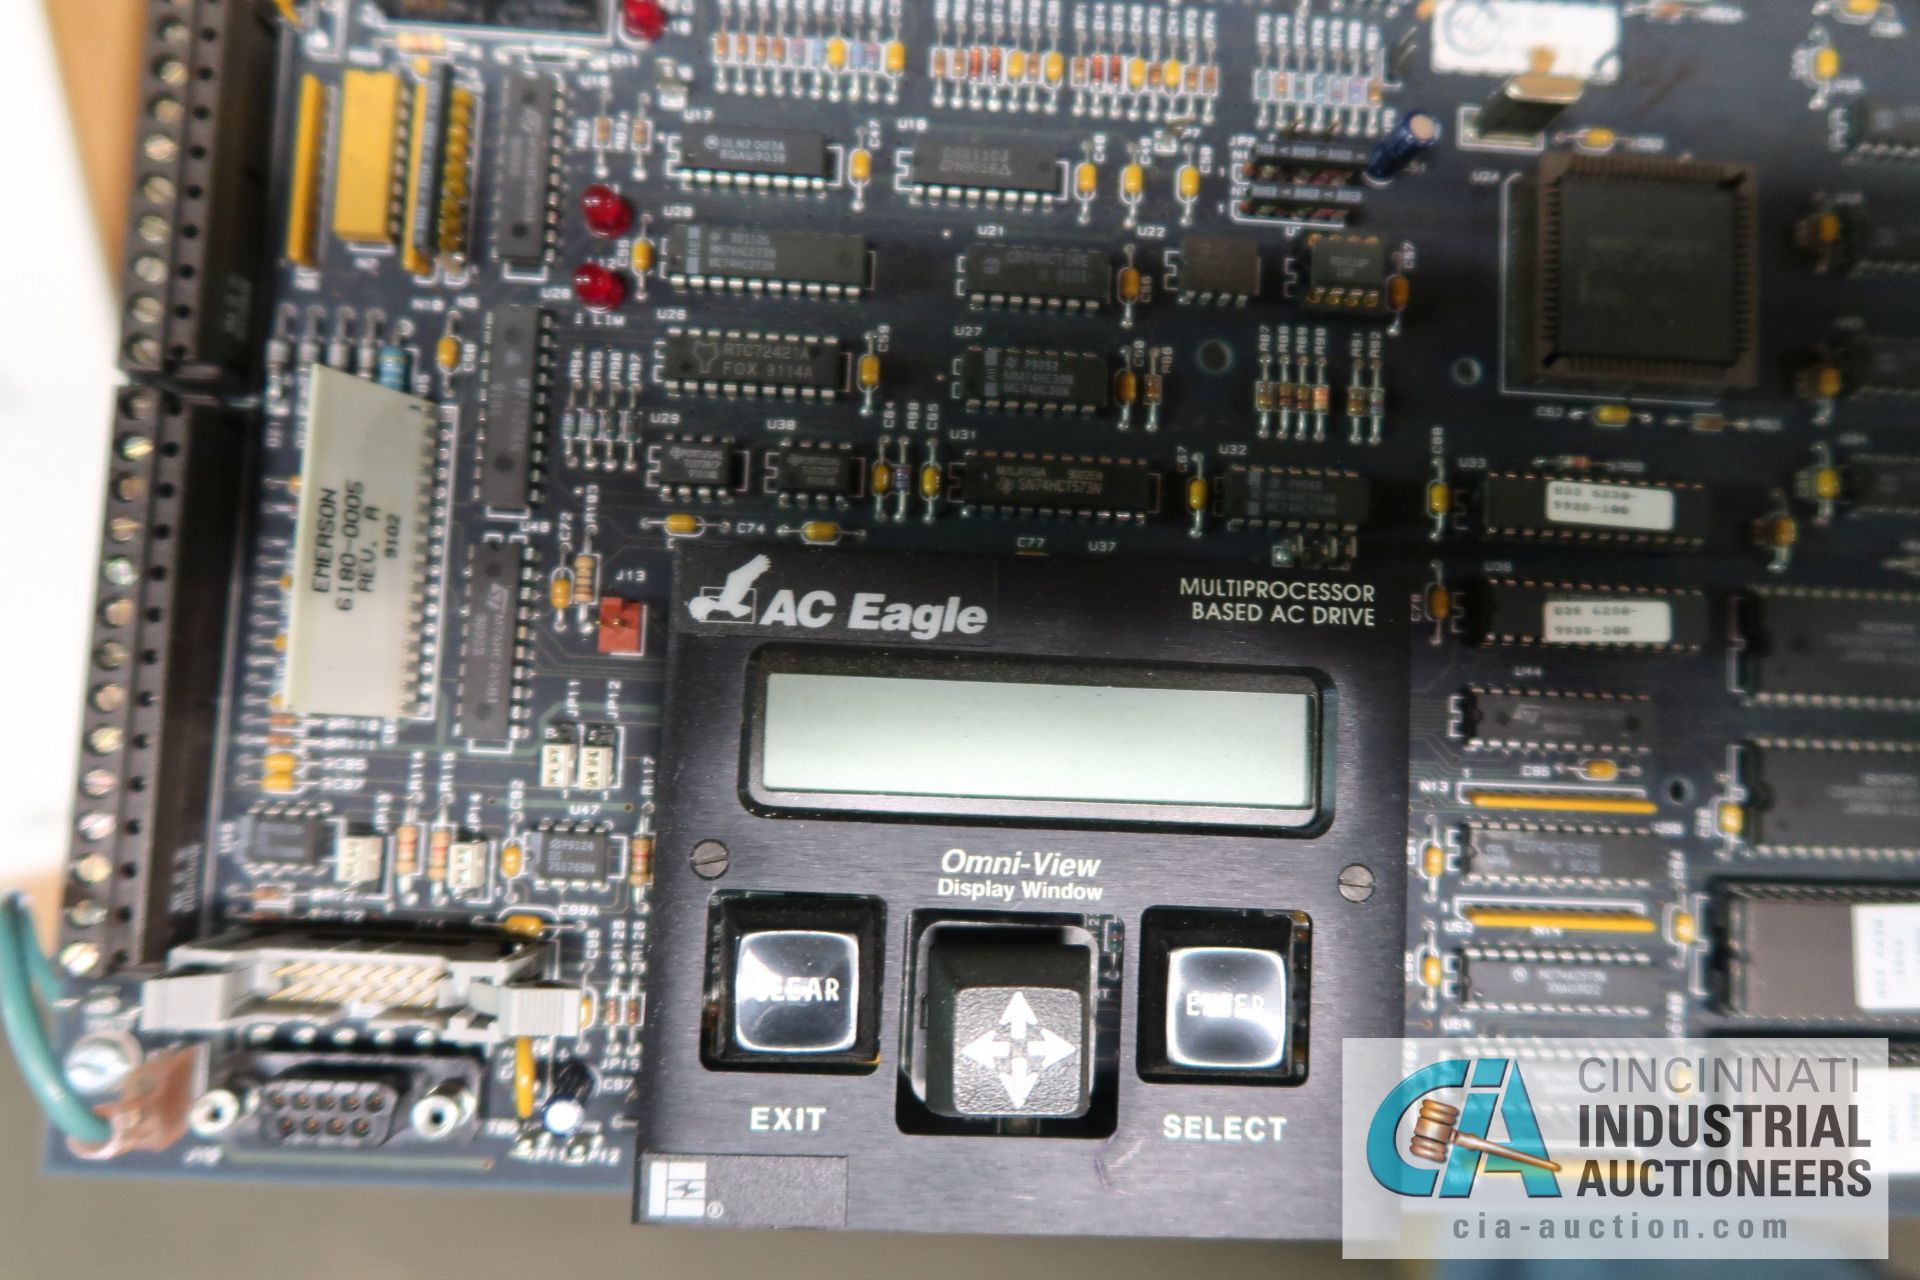 AC EAGLE / EMERSON MODEL WE8201 ADJUSTABLE FREQUENCY MICROCOMPUTER BASED DIGITAL AC DRIVES - Image 3 of 5